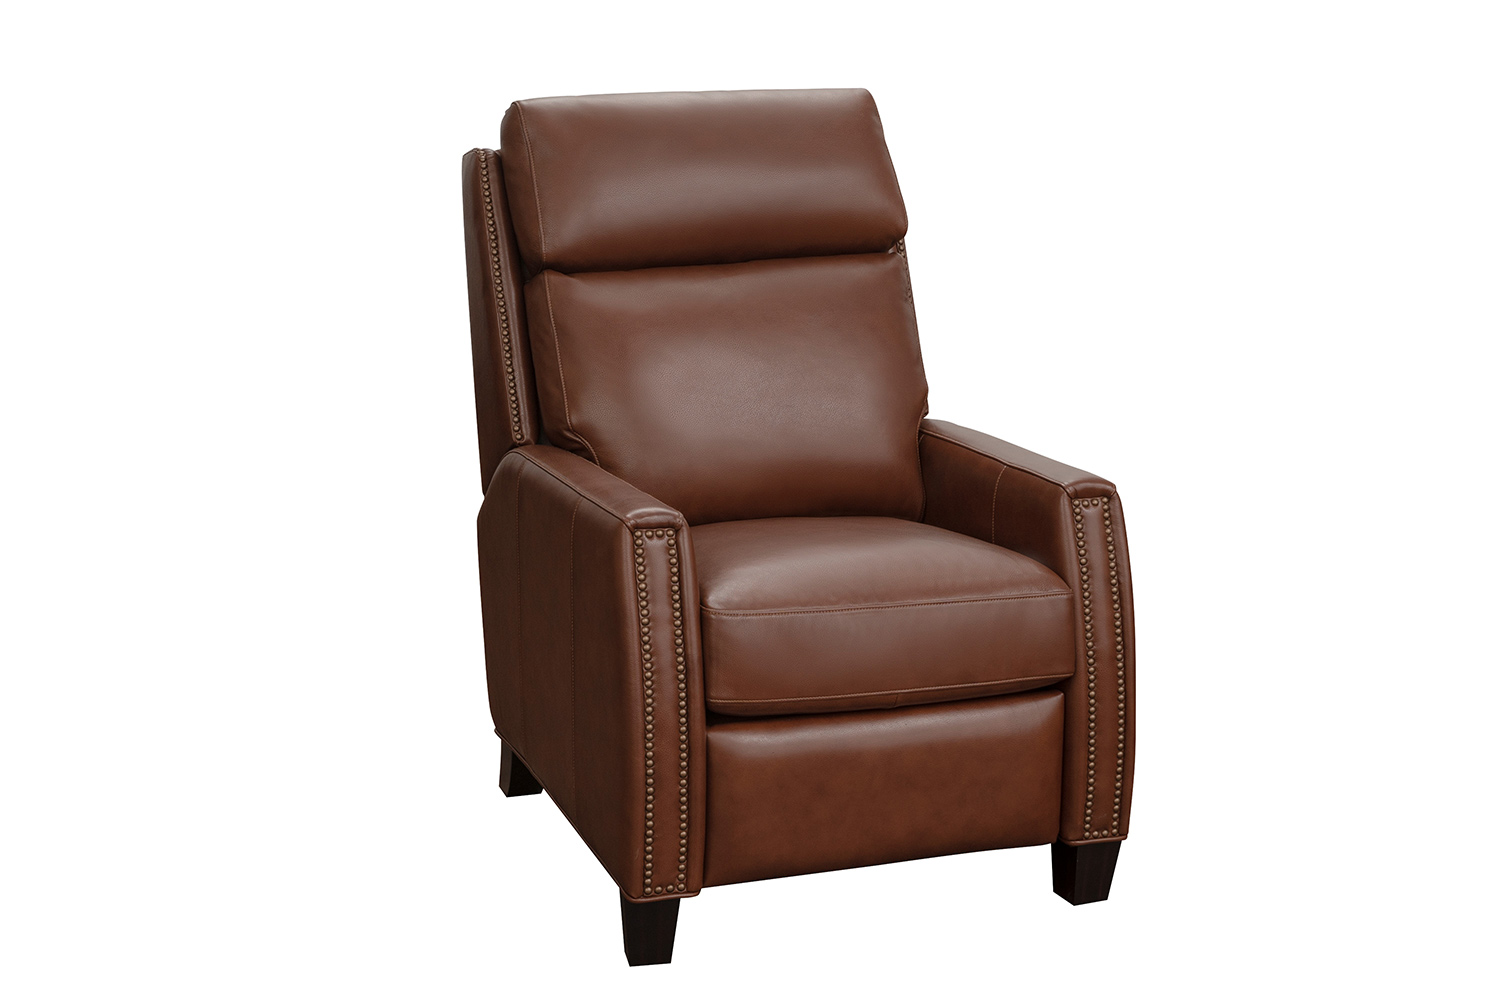 Barcalounger Anaheim Big and Tall Recliner Chair - Ashford Bitters/All Leather